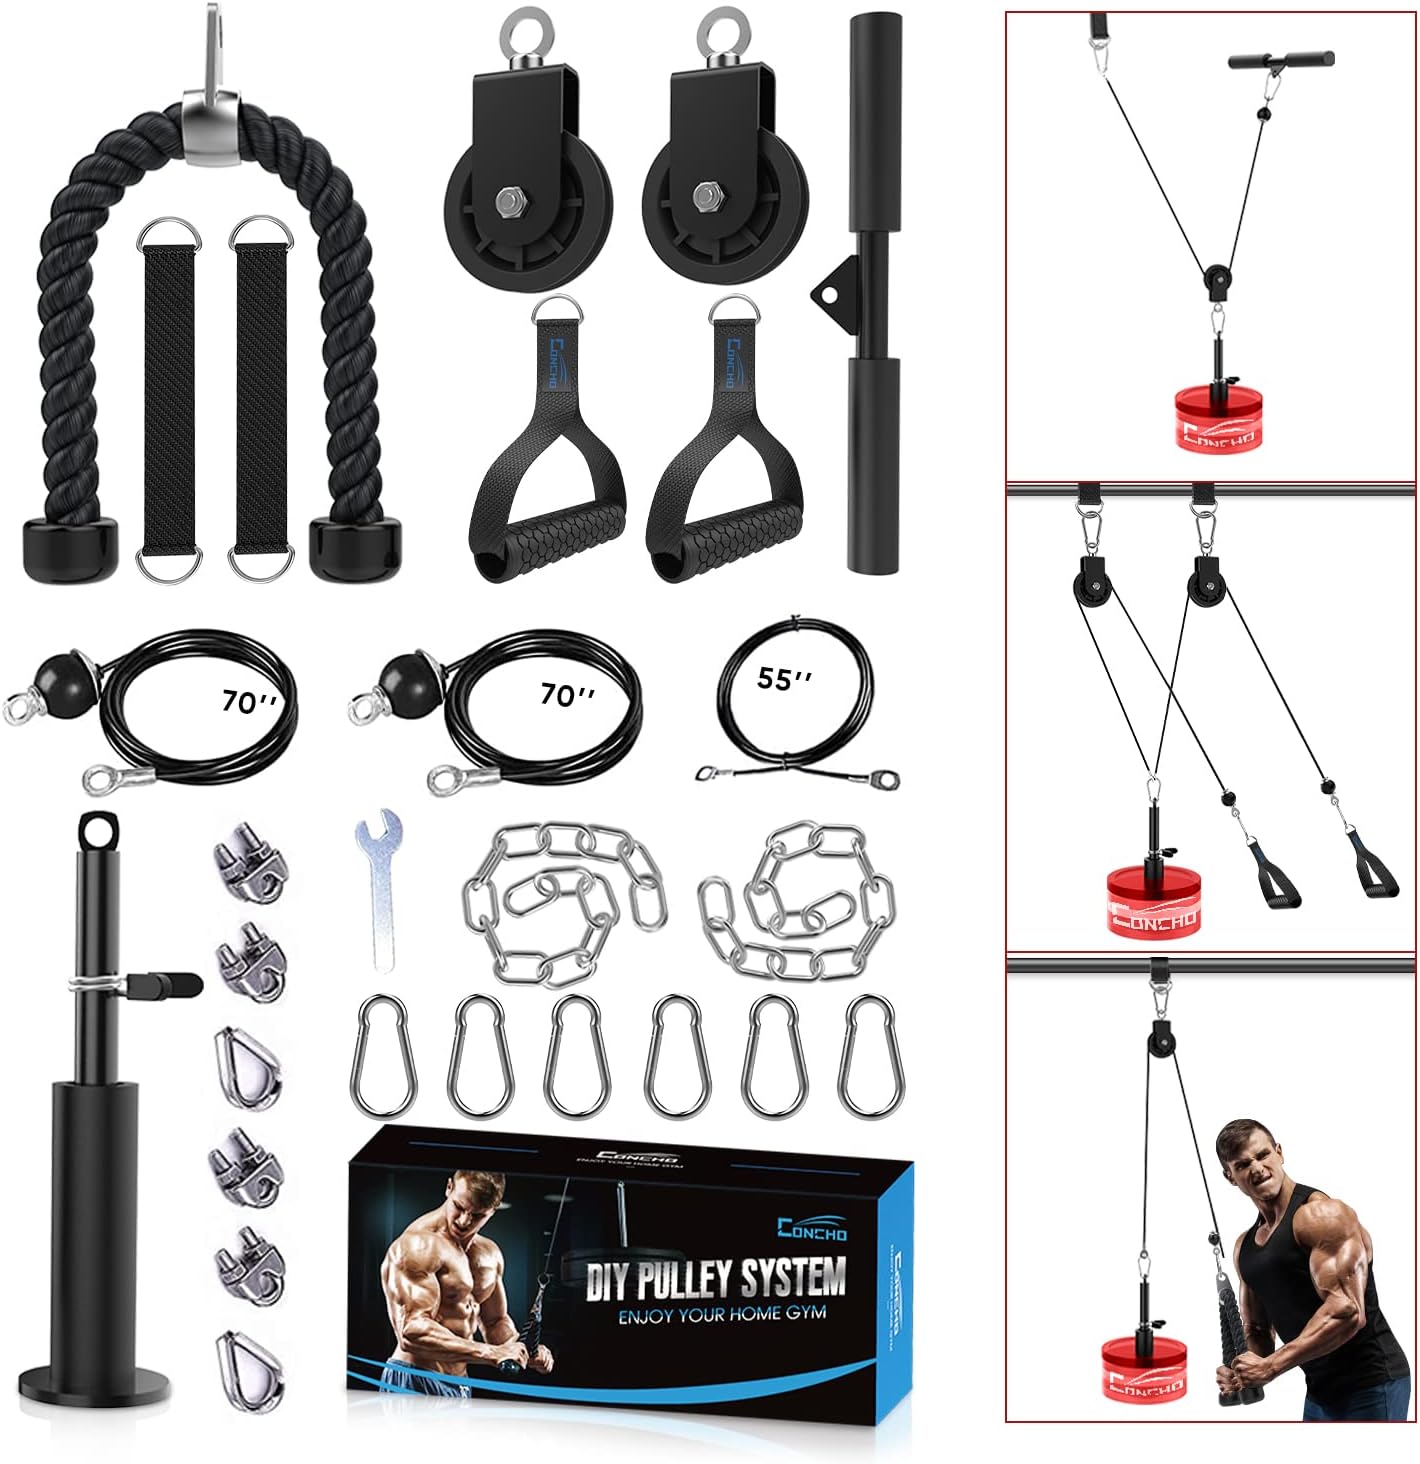 Concho Cable Pulley System Gym, Upgraded Weight Pulley [...]